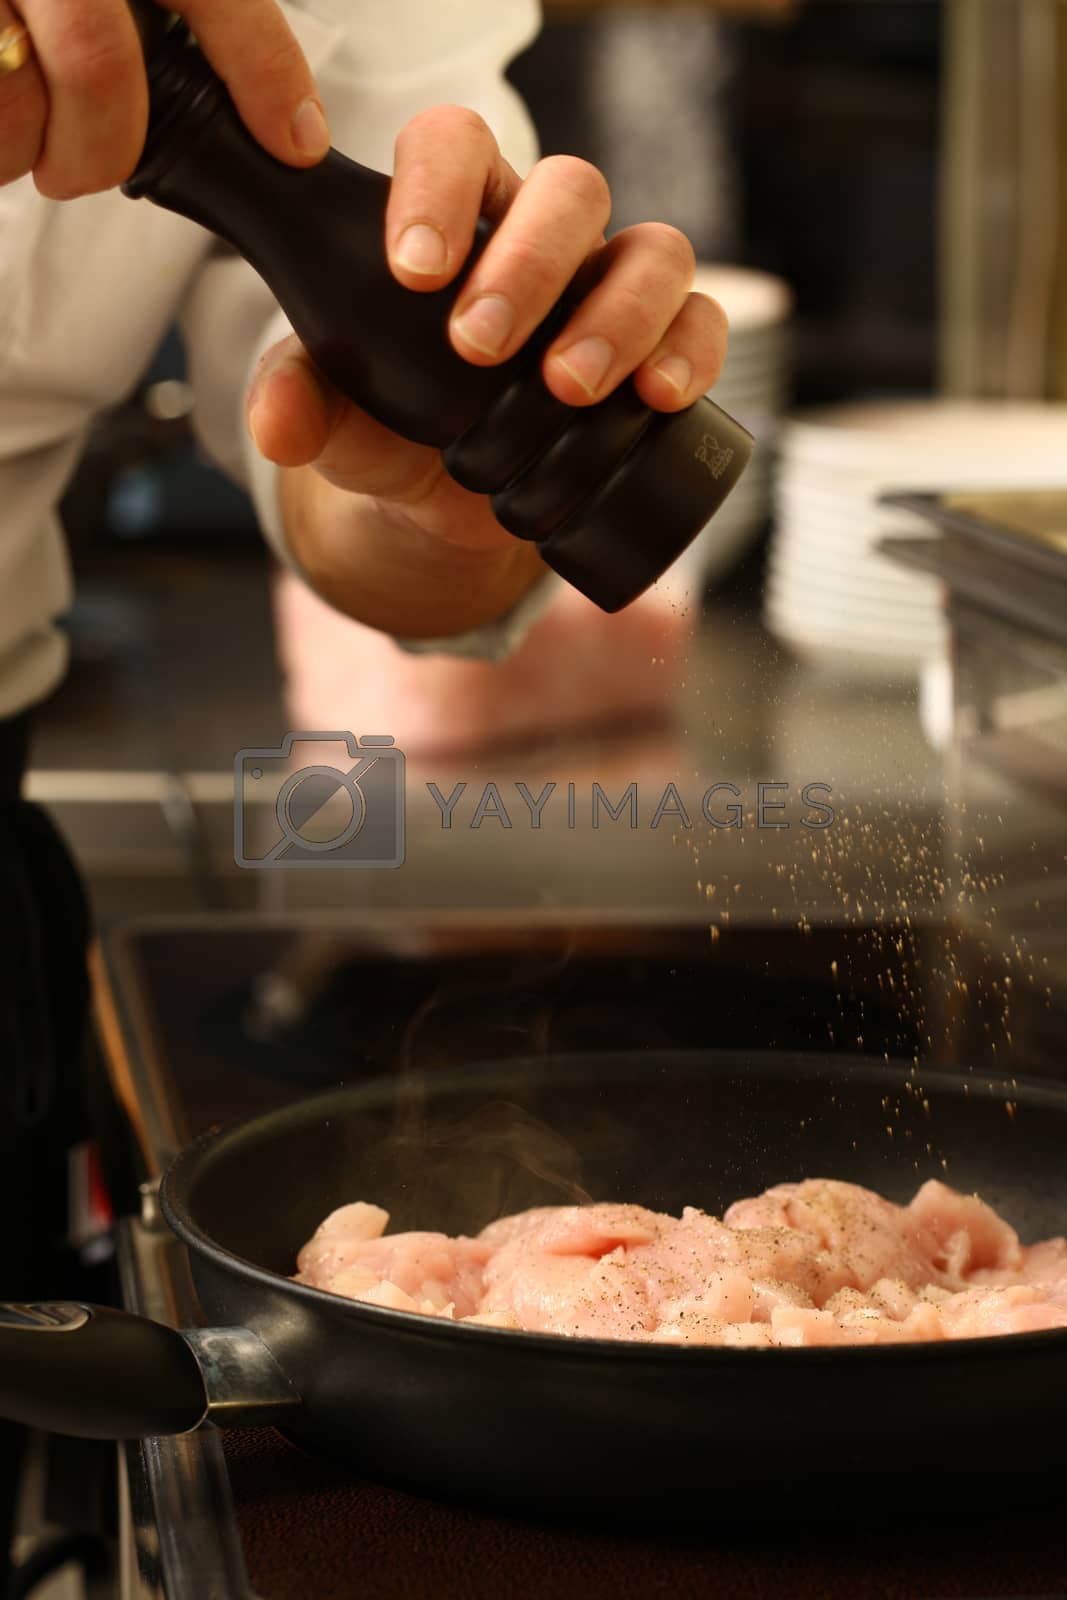 Royalty free image of professional cook in kitchen preparing food for customers showing by PeterHofstetter